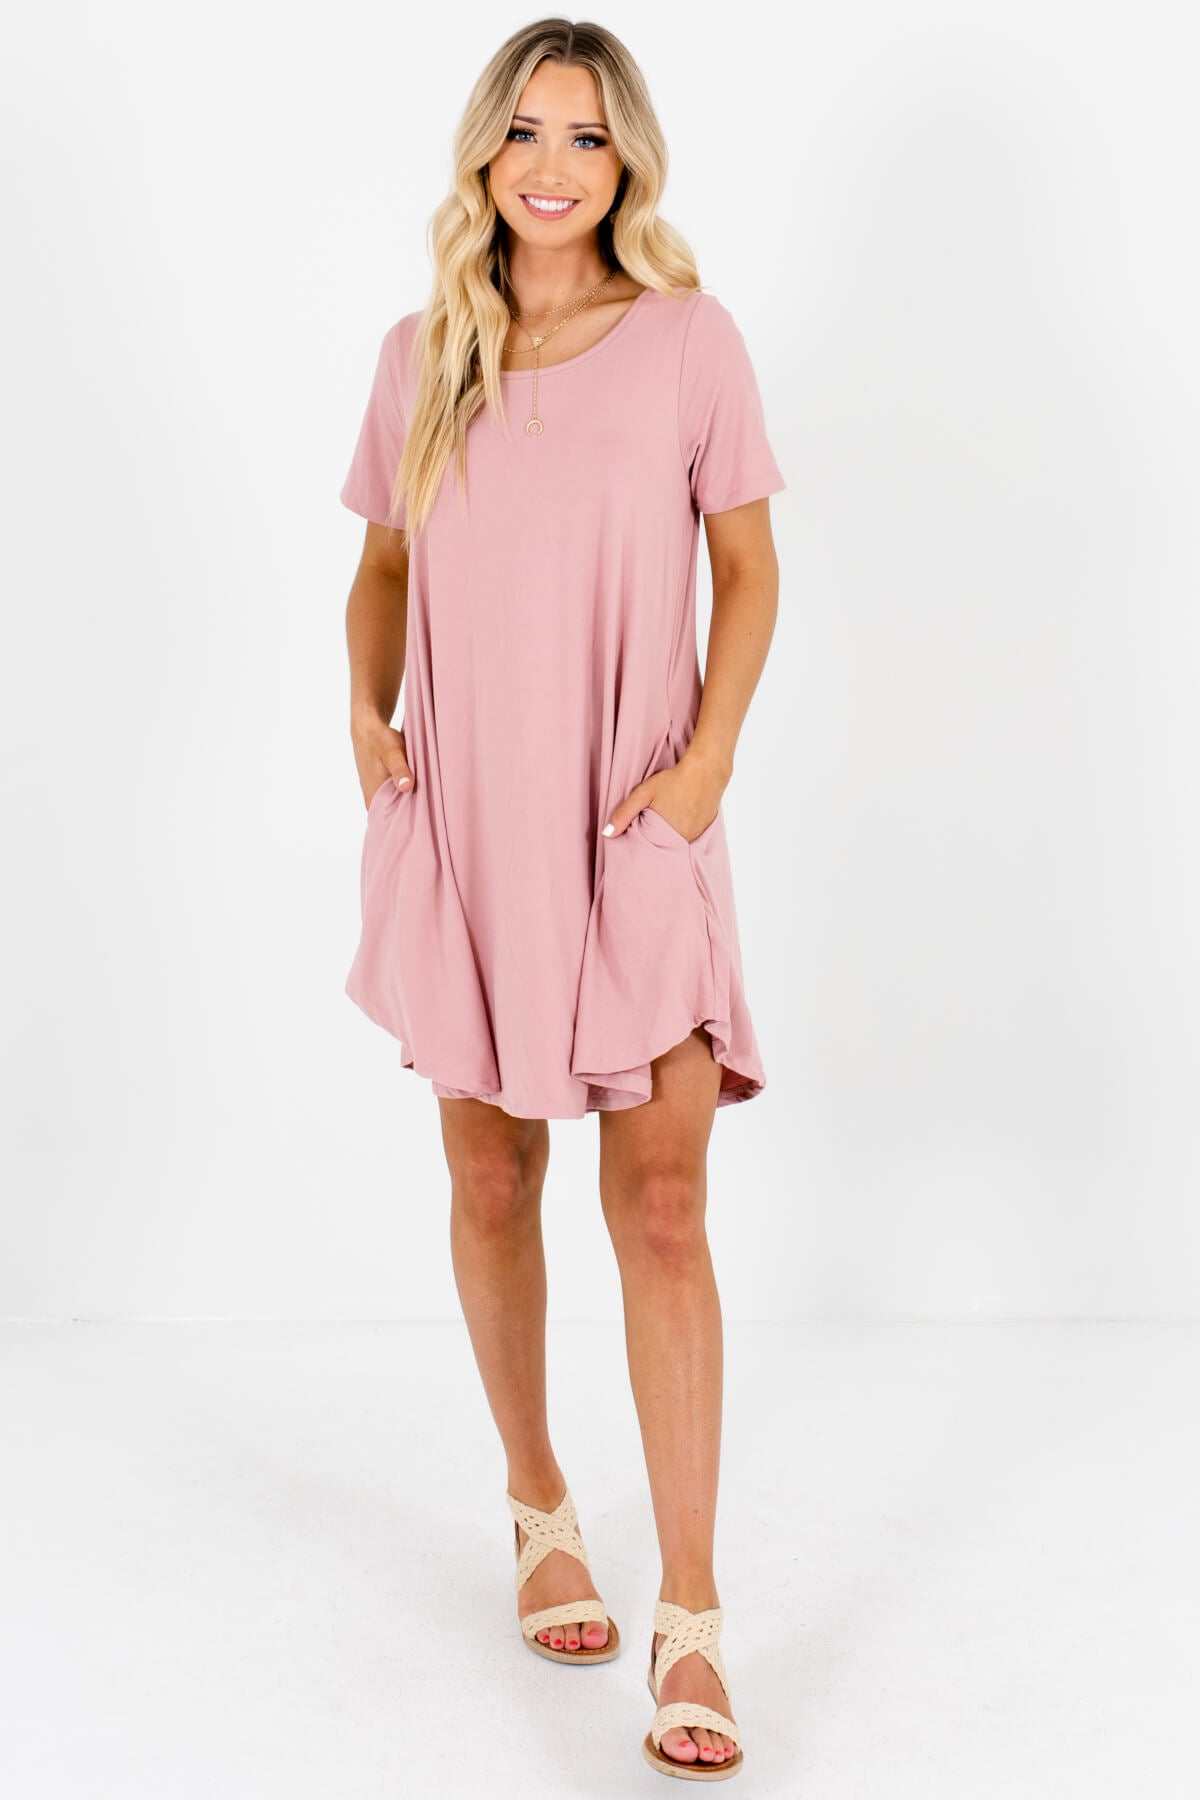 Pink Rounded Hem Soft Mini Dresses with Pockets Boutique